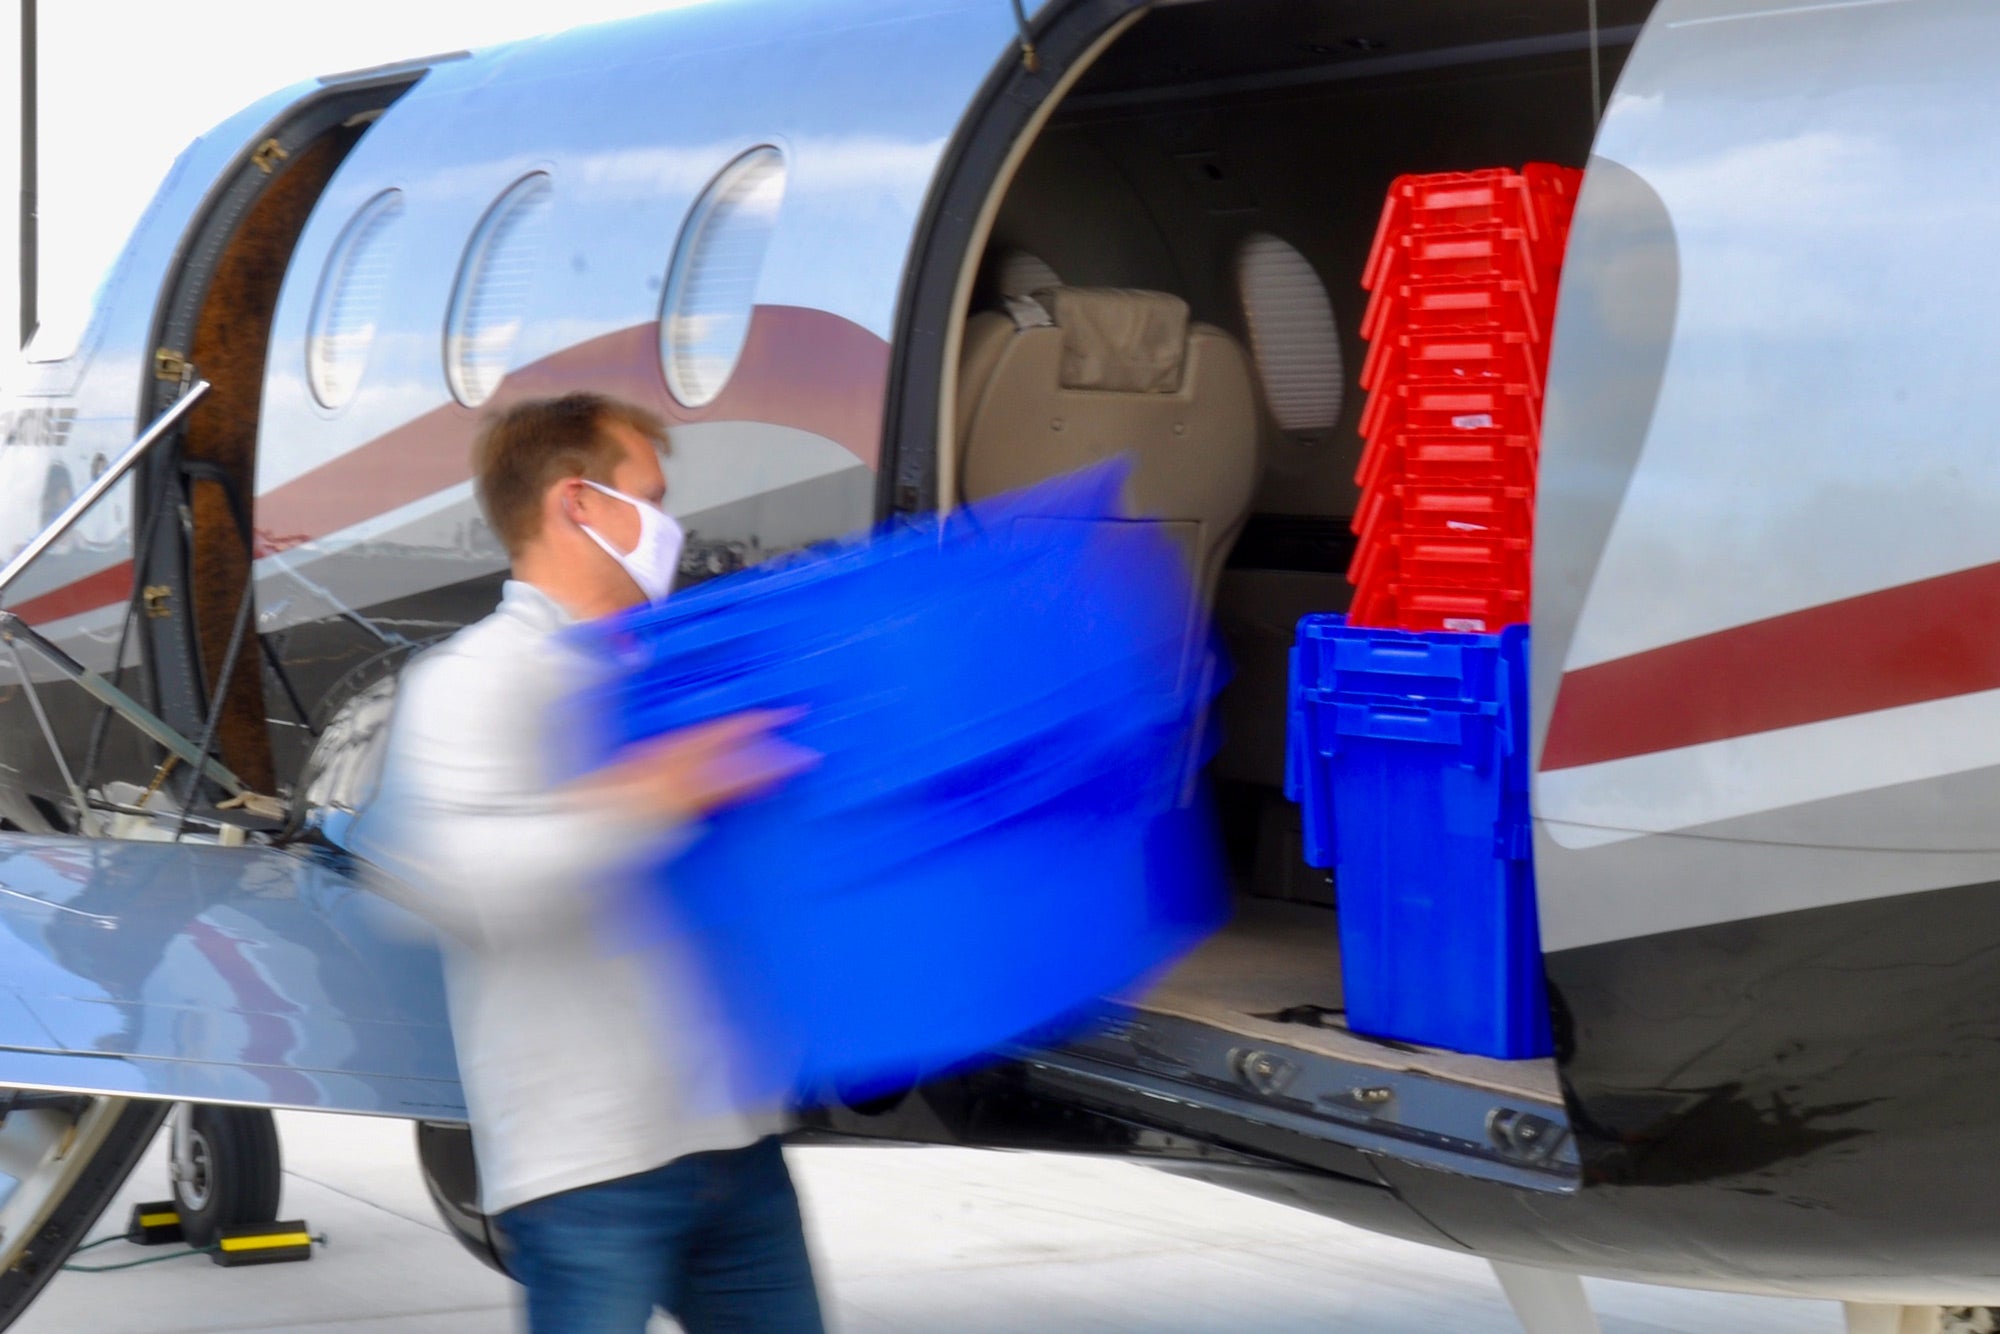 Loading cargo into the back of an airplane.